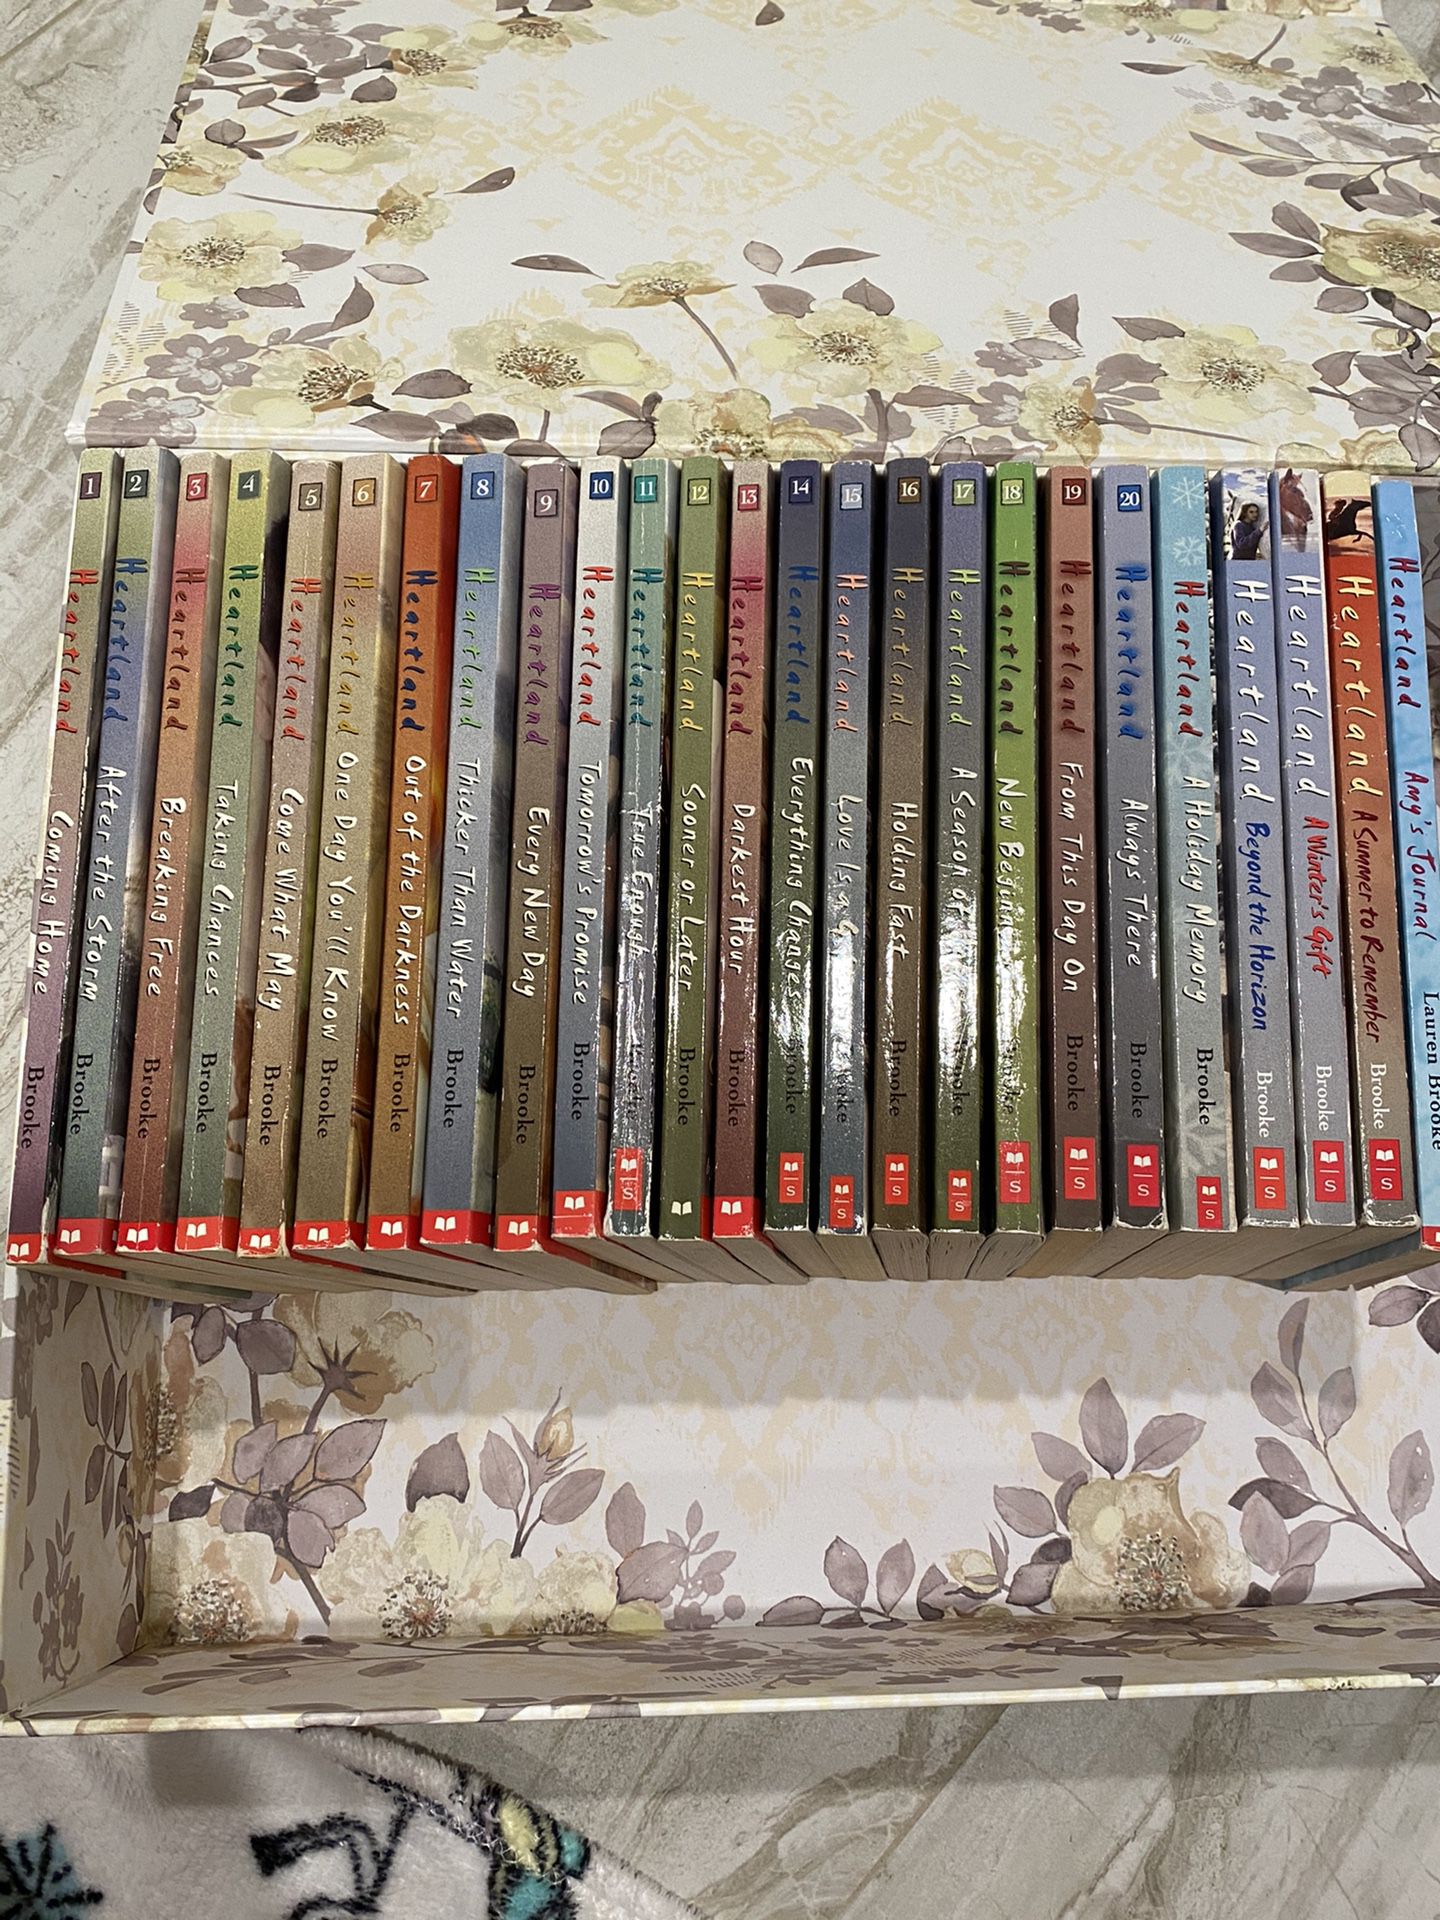 HEARTLAND COMPLETE BOOK SERIES (1-20) + 4 special edition, INCLUDING Marguerite Henry stable of classics (8 book set)